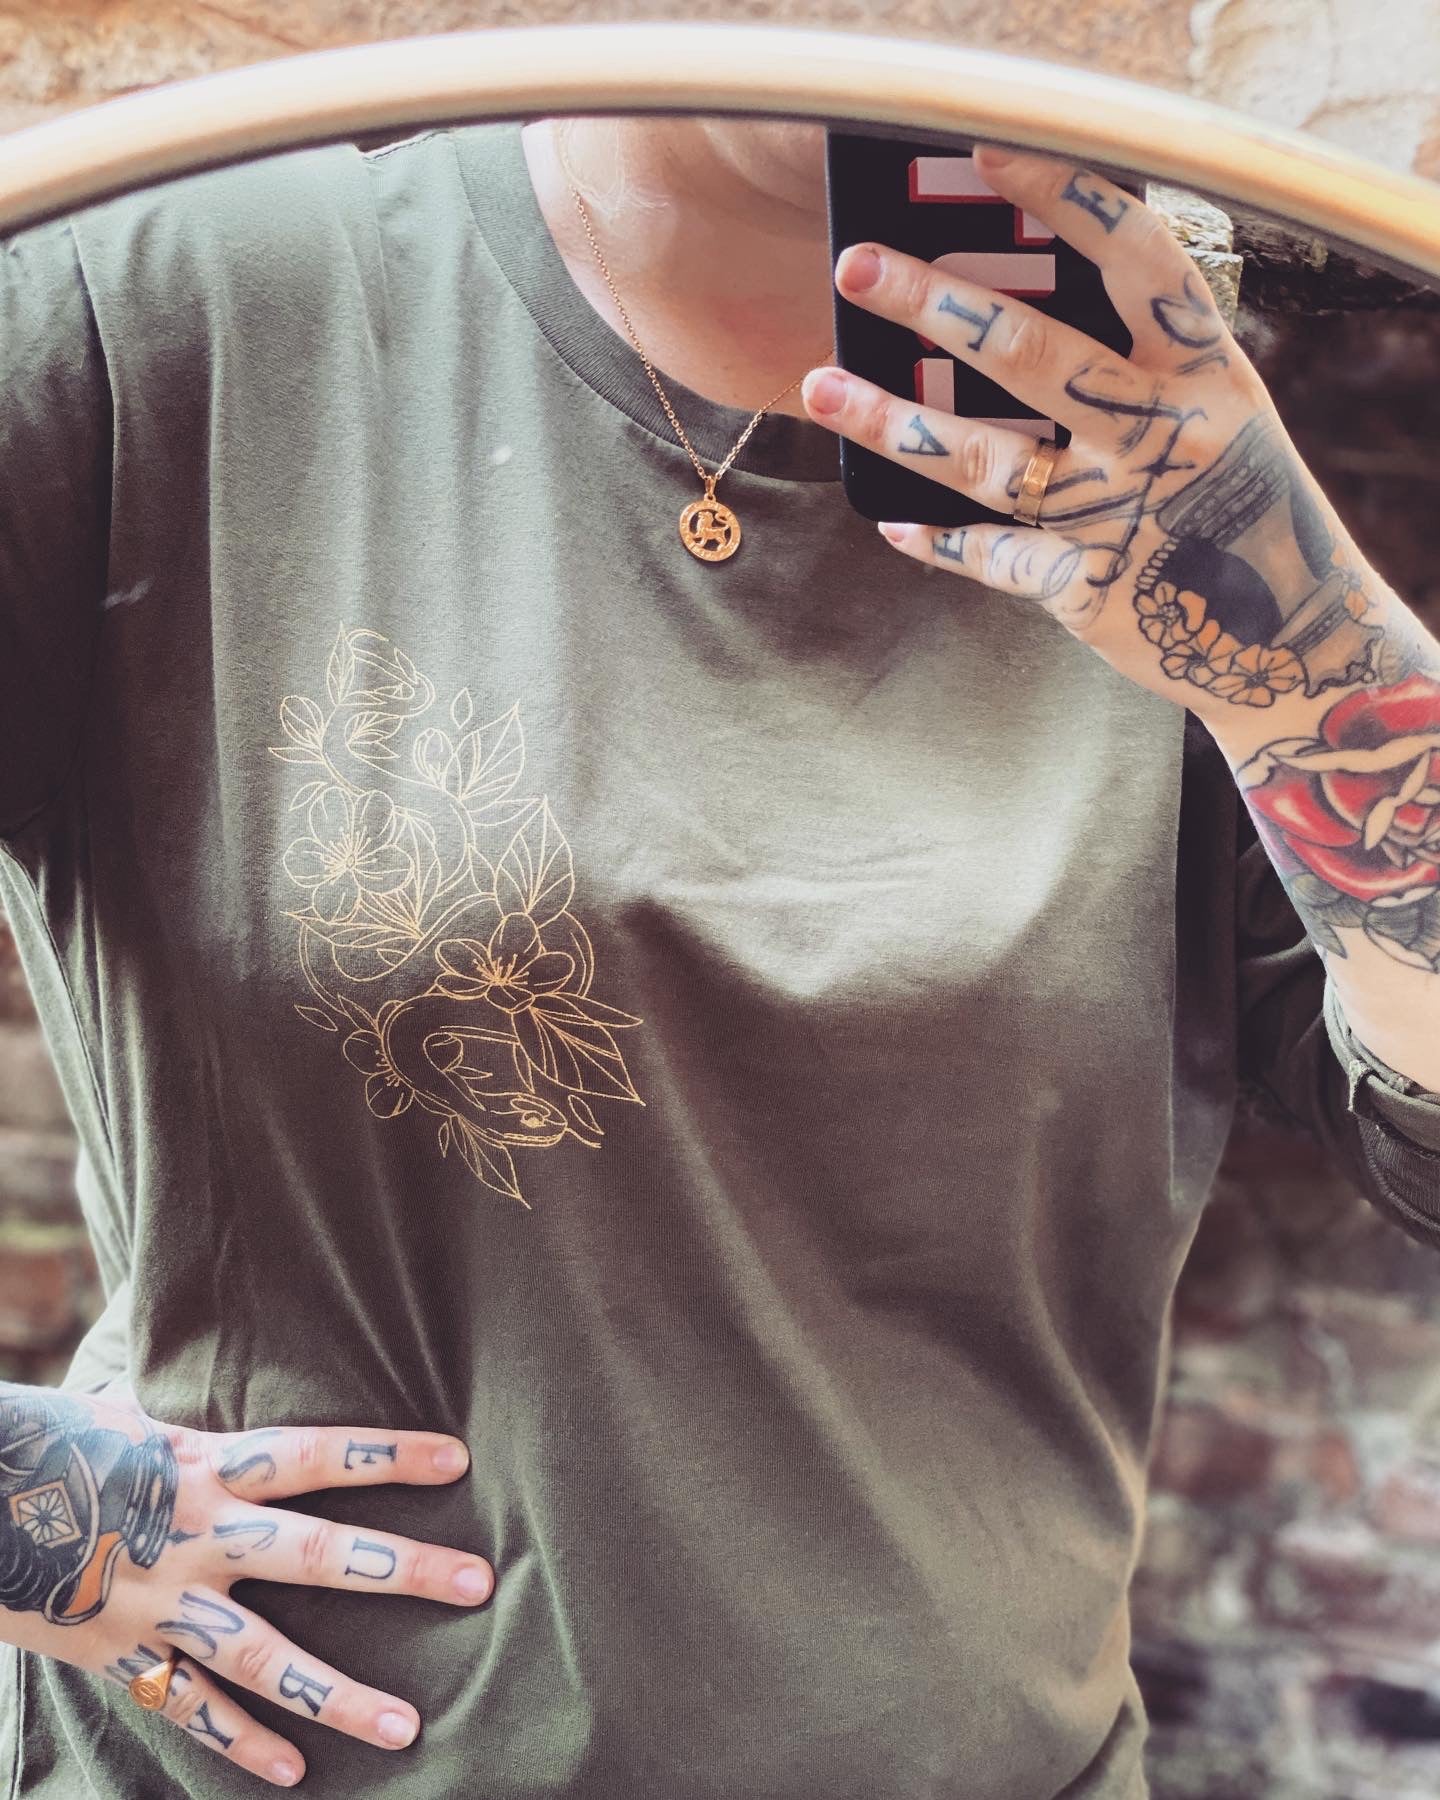 Sullen Clothing for Sale | Tattoo Inspired Apparel | Inked Shop - Inked Shop